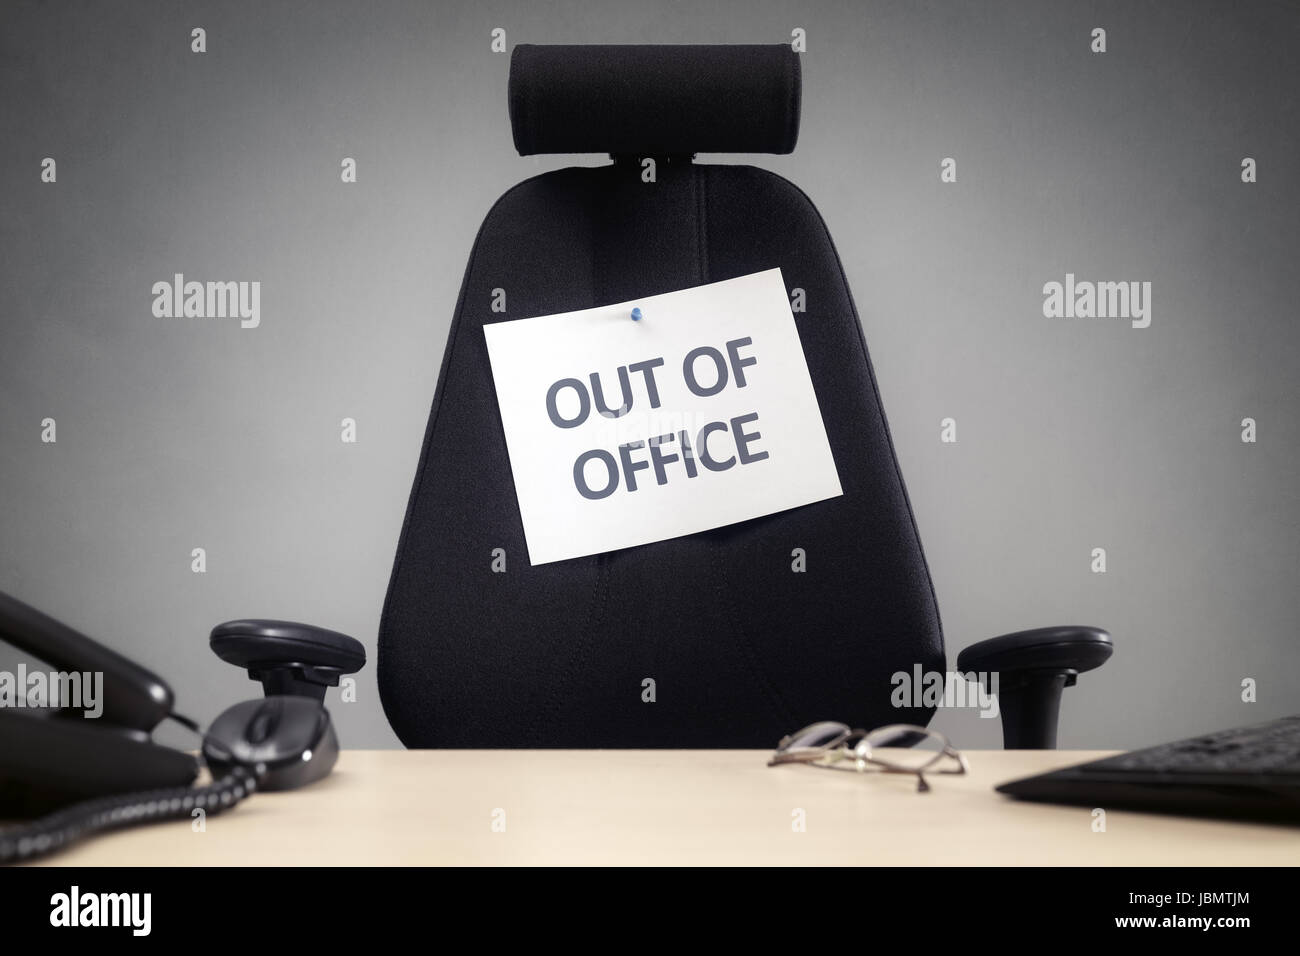 Business chair with out of office sign concept for vacation, holiday, lunch break or work life balance Stock Photo